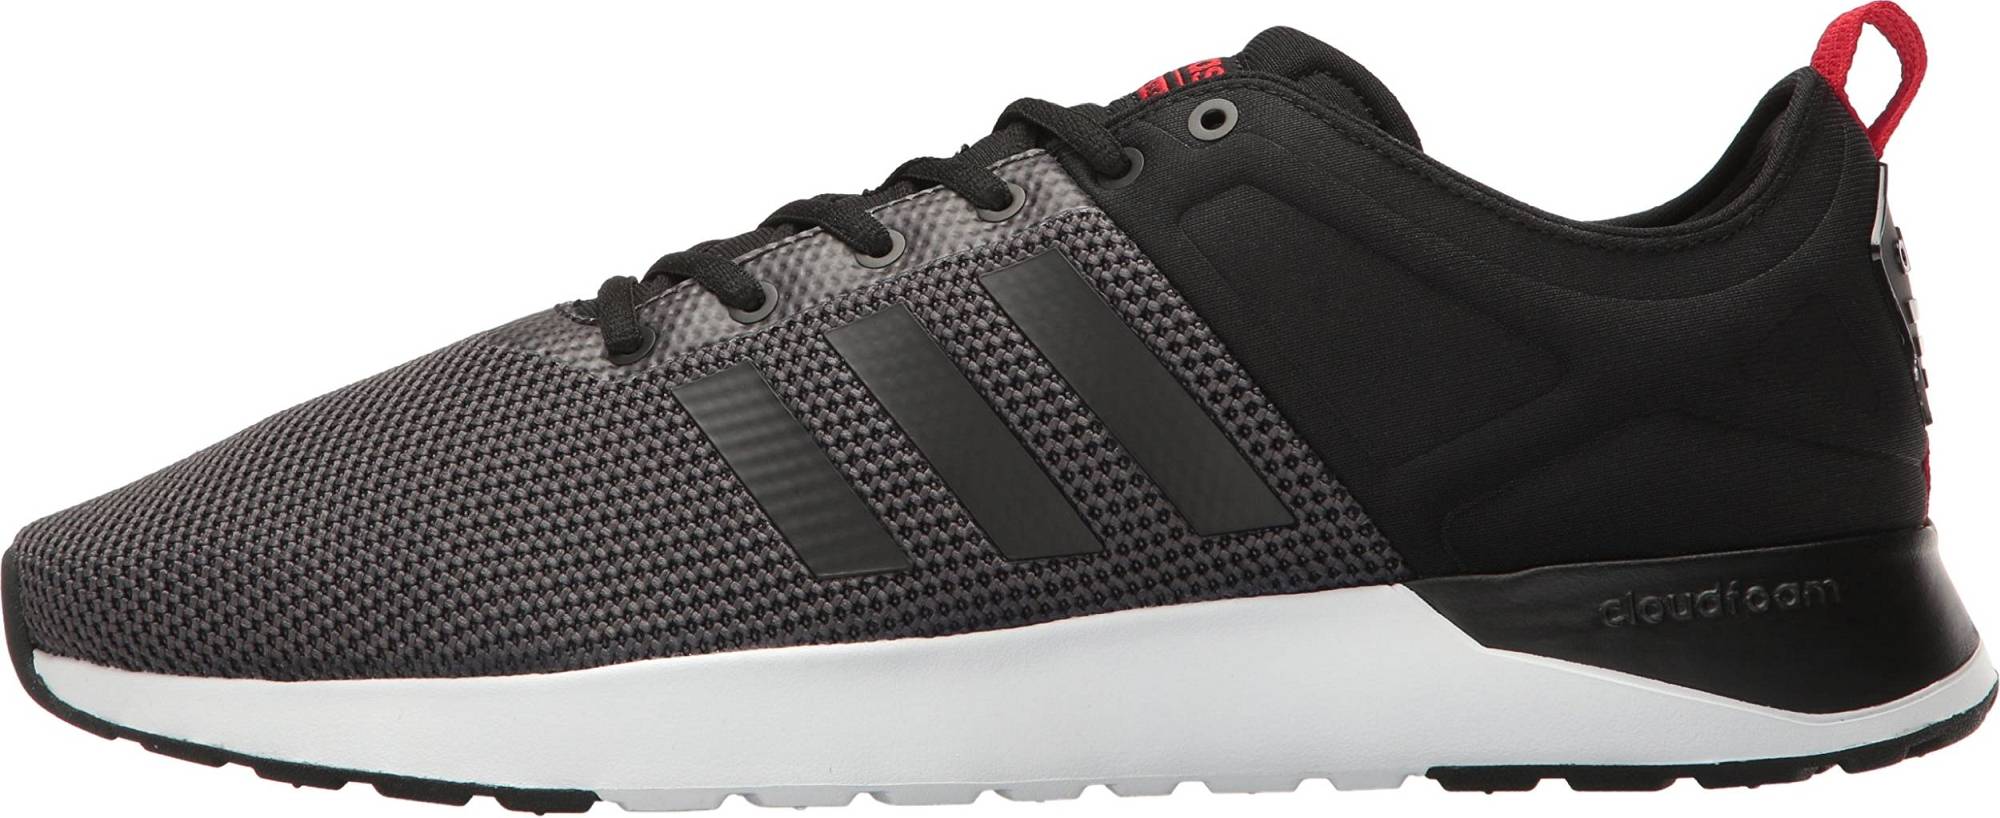 Adidas Cloudfoam Super Racer – Shoes Reviews & Reasons To Buy